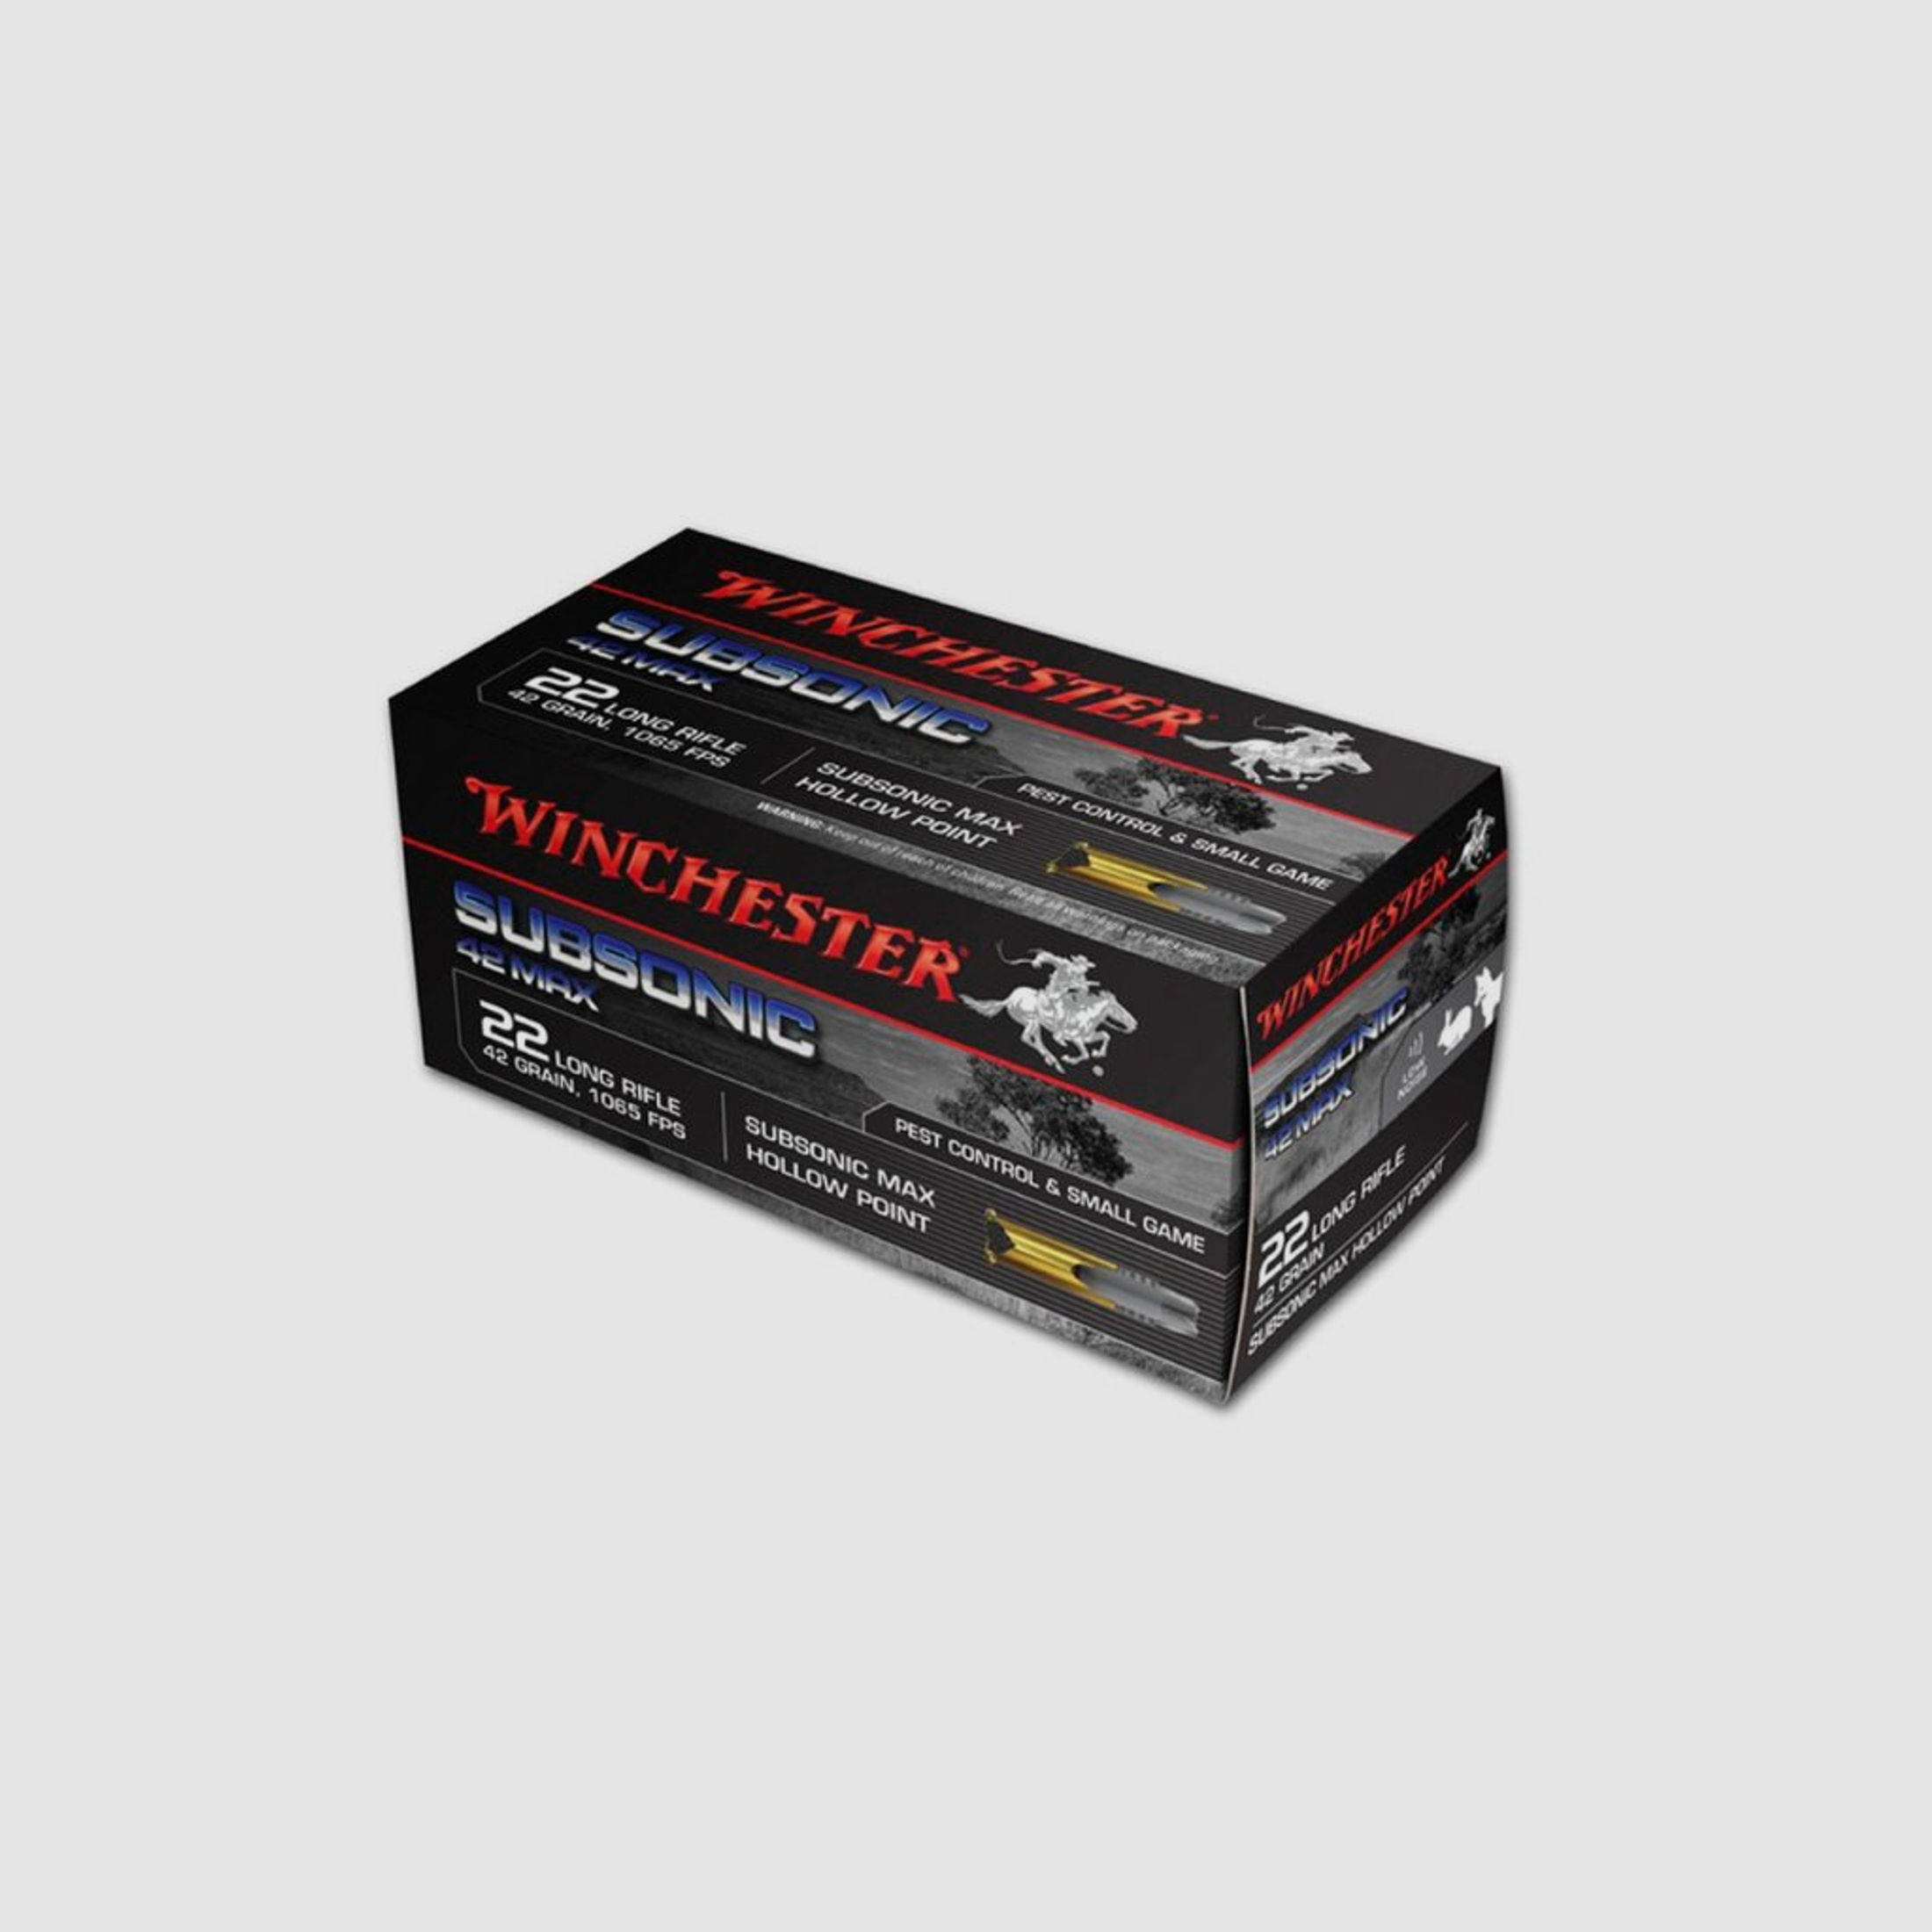 WINCHESTER .22LR Subsonic Hollow Point